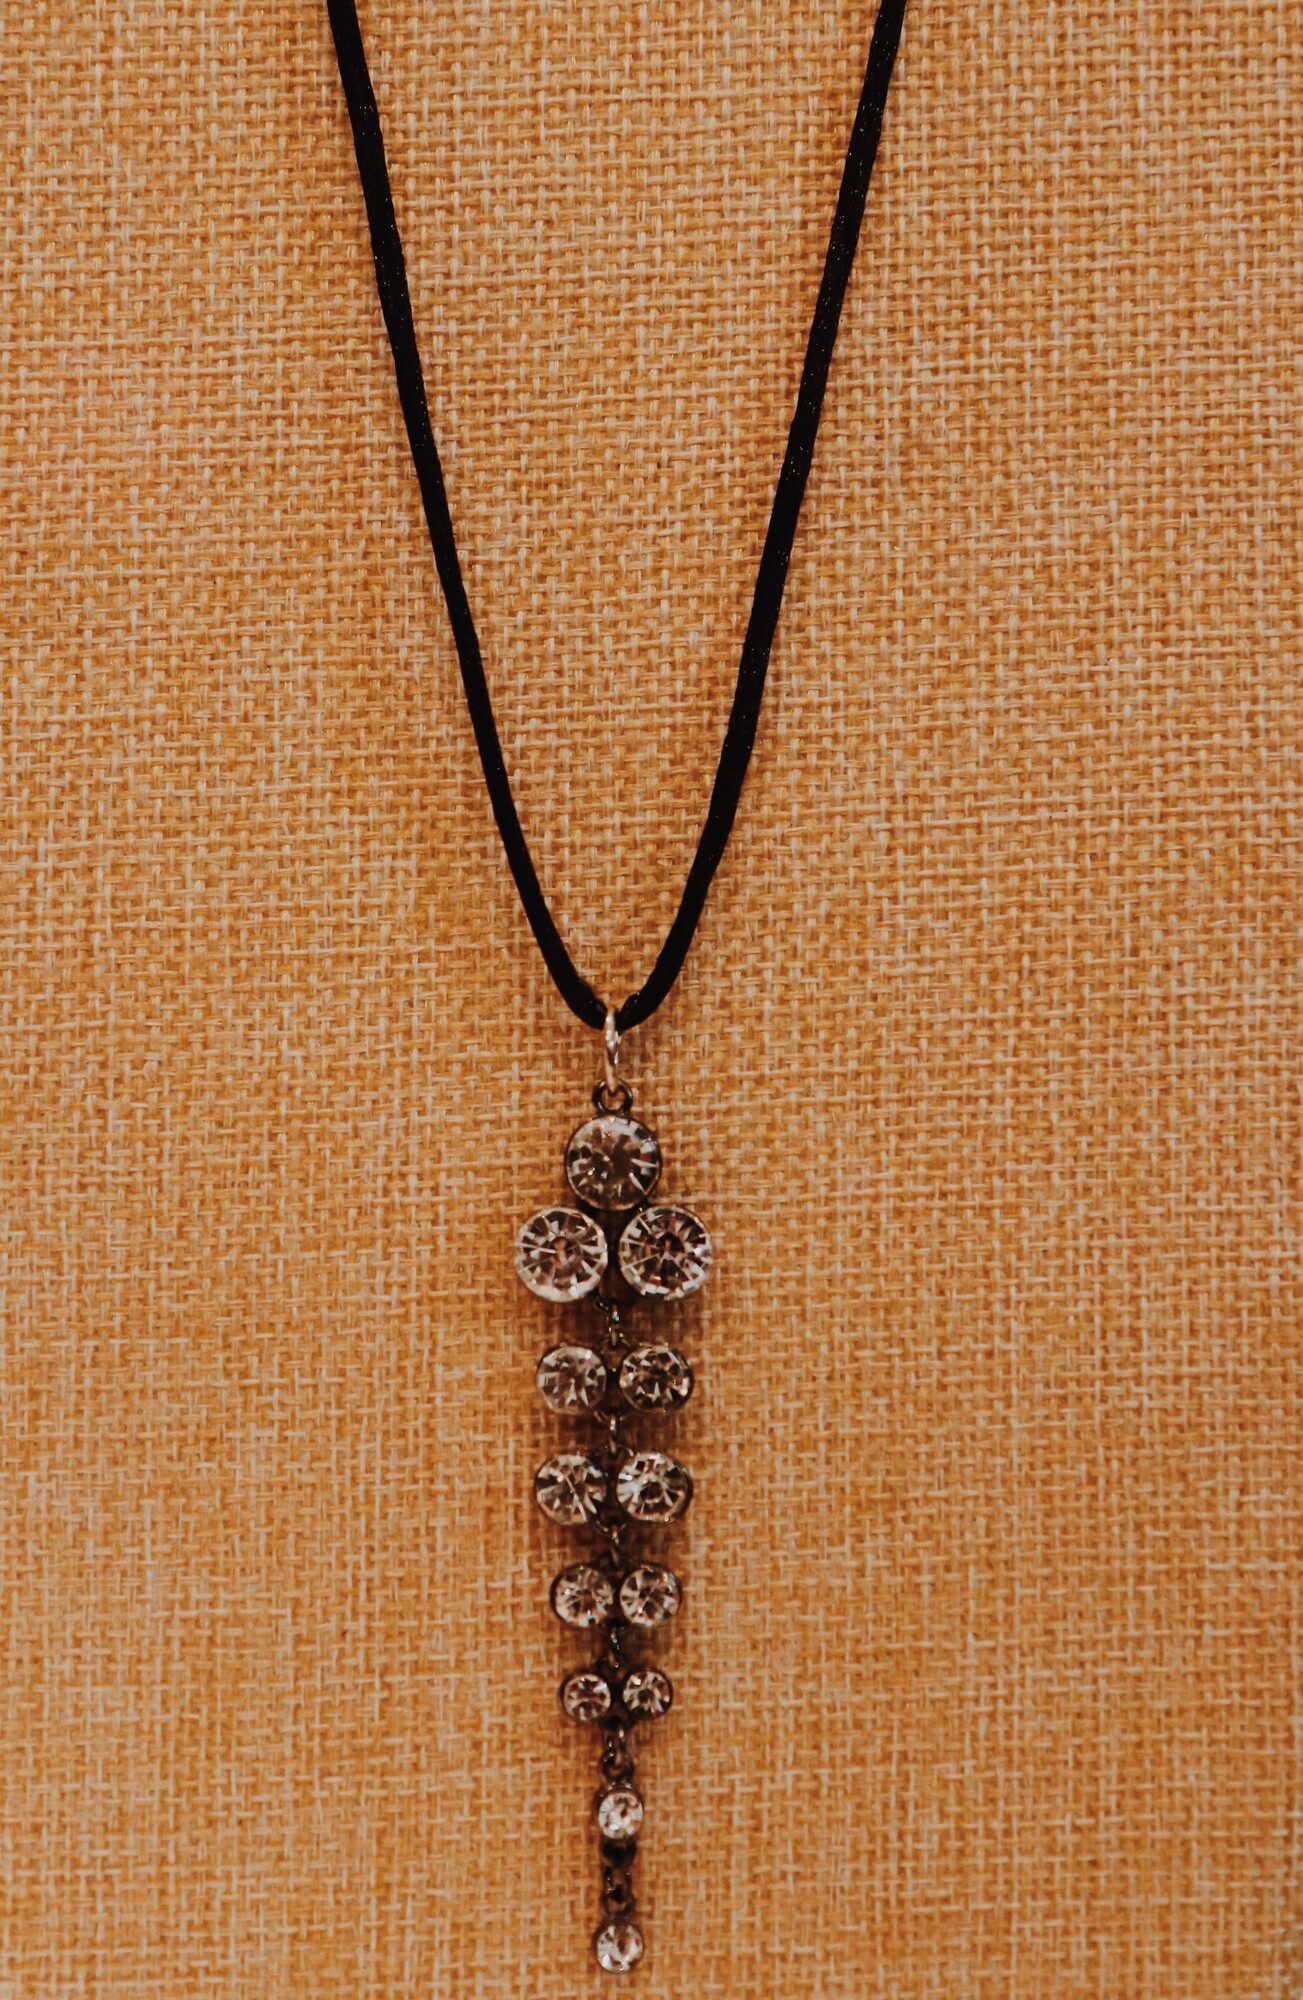 This necklace by Kelli Hawk Designs has a beautiful vintage pendant and hangs on a 17 inch cord with a 2 inch extender.